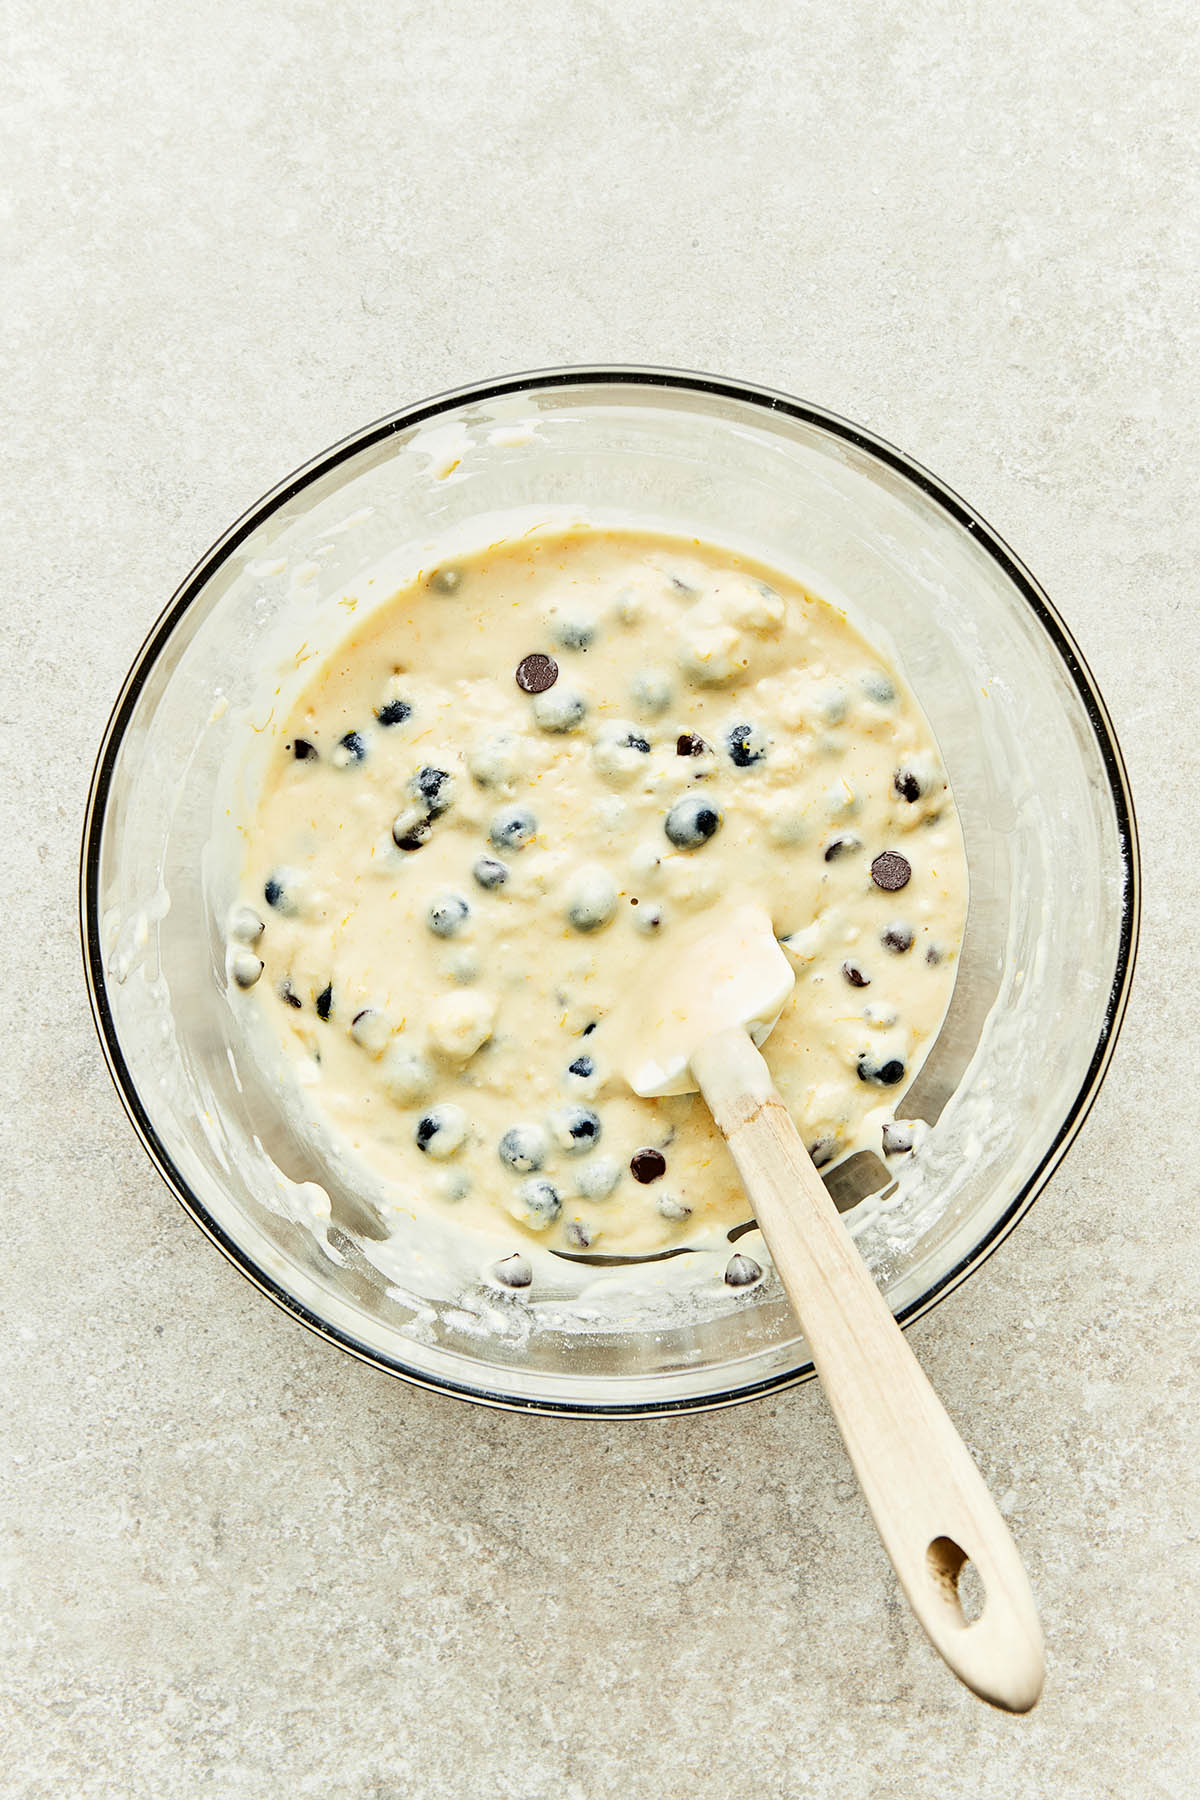 A bowl of batter with blueberries and chocolate chips.